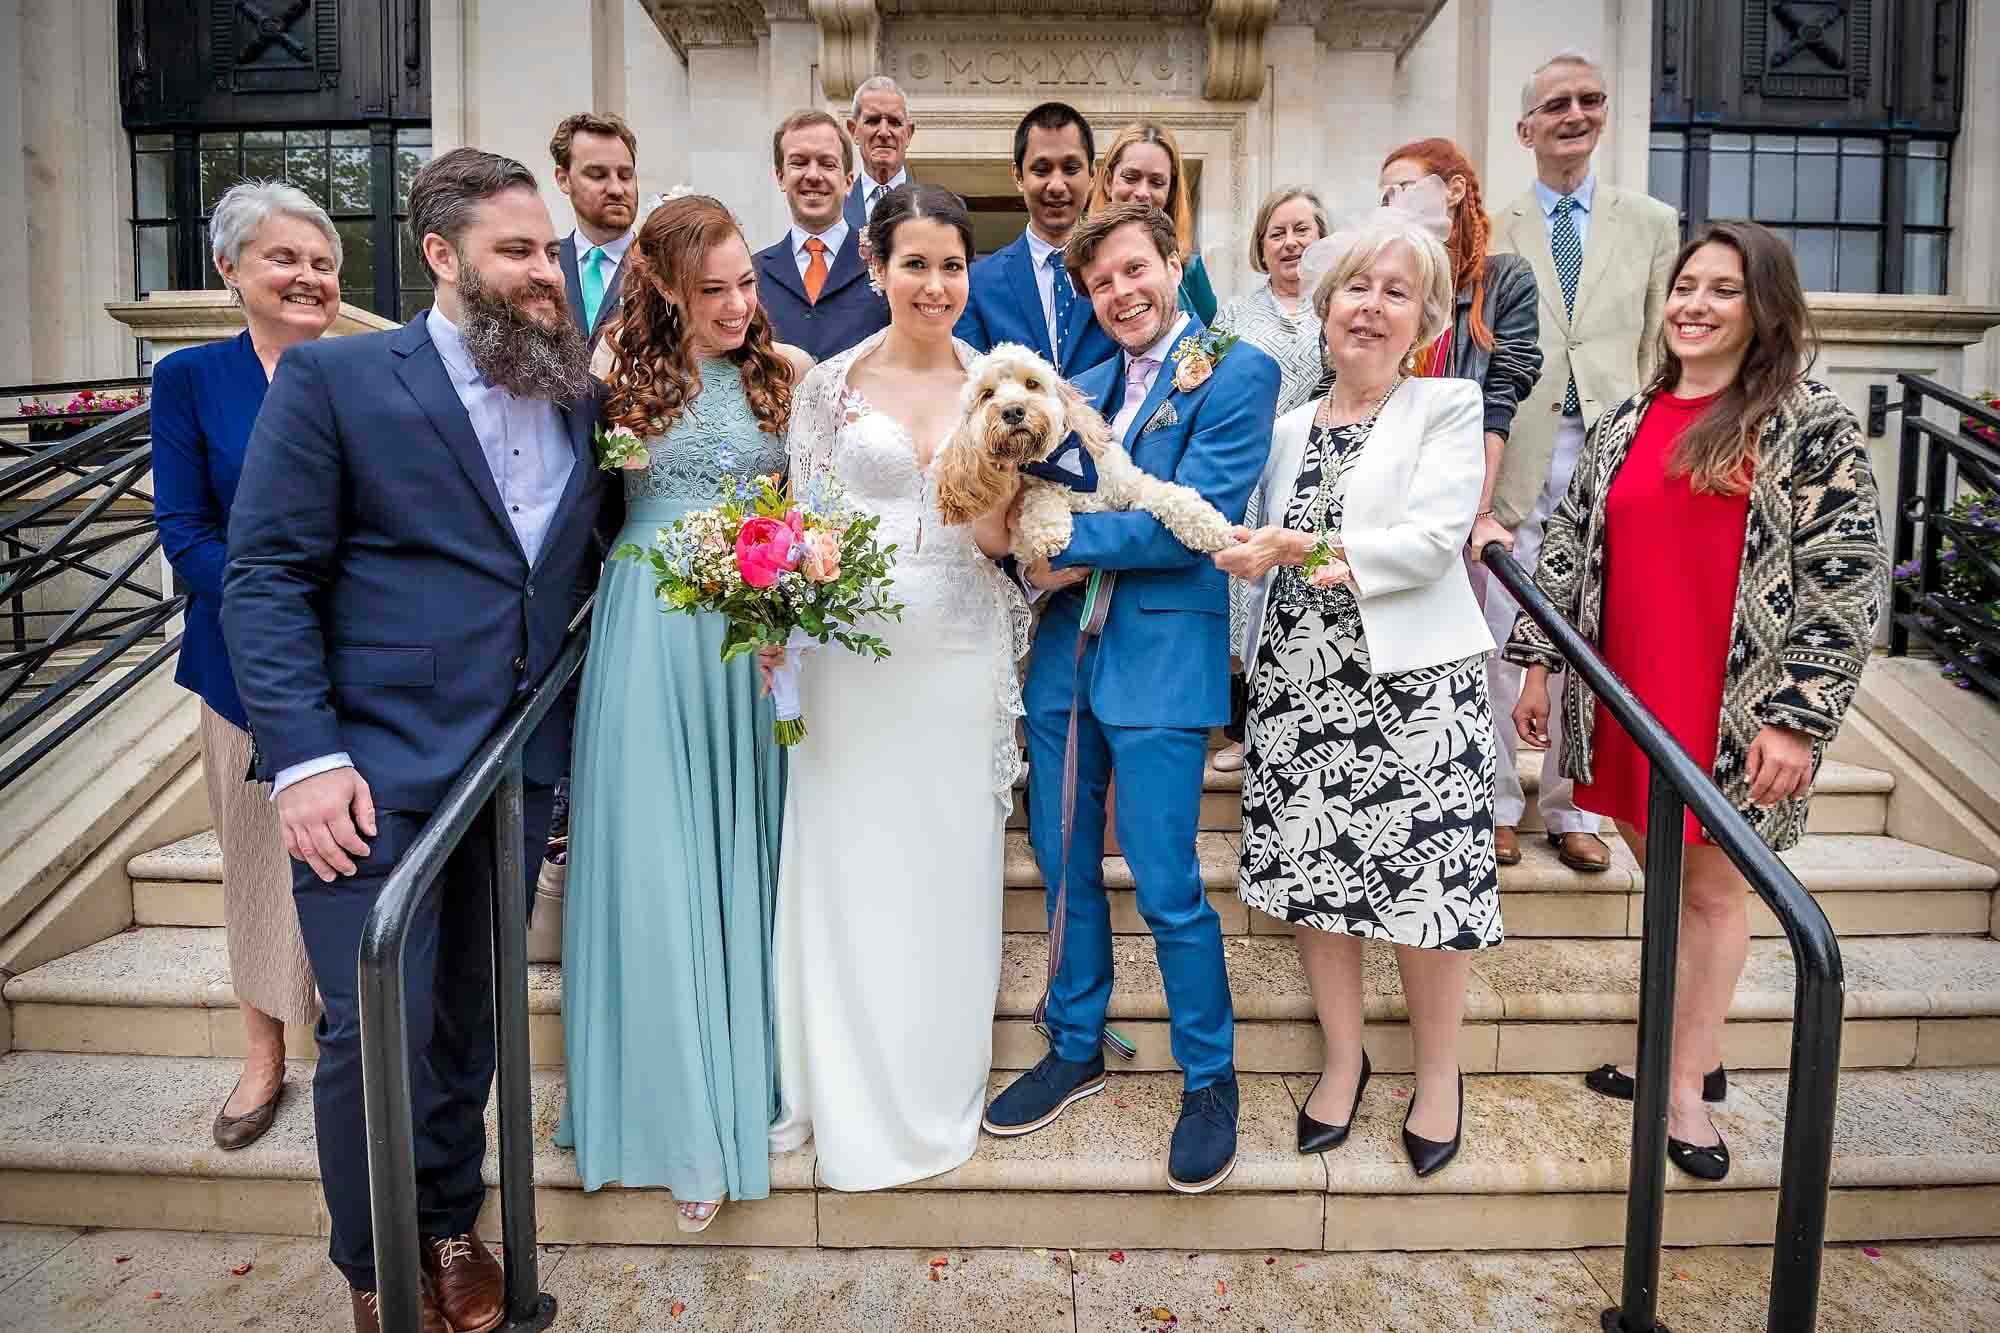 The couple pose with their family, friends and dog outside Islington Town Hall